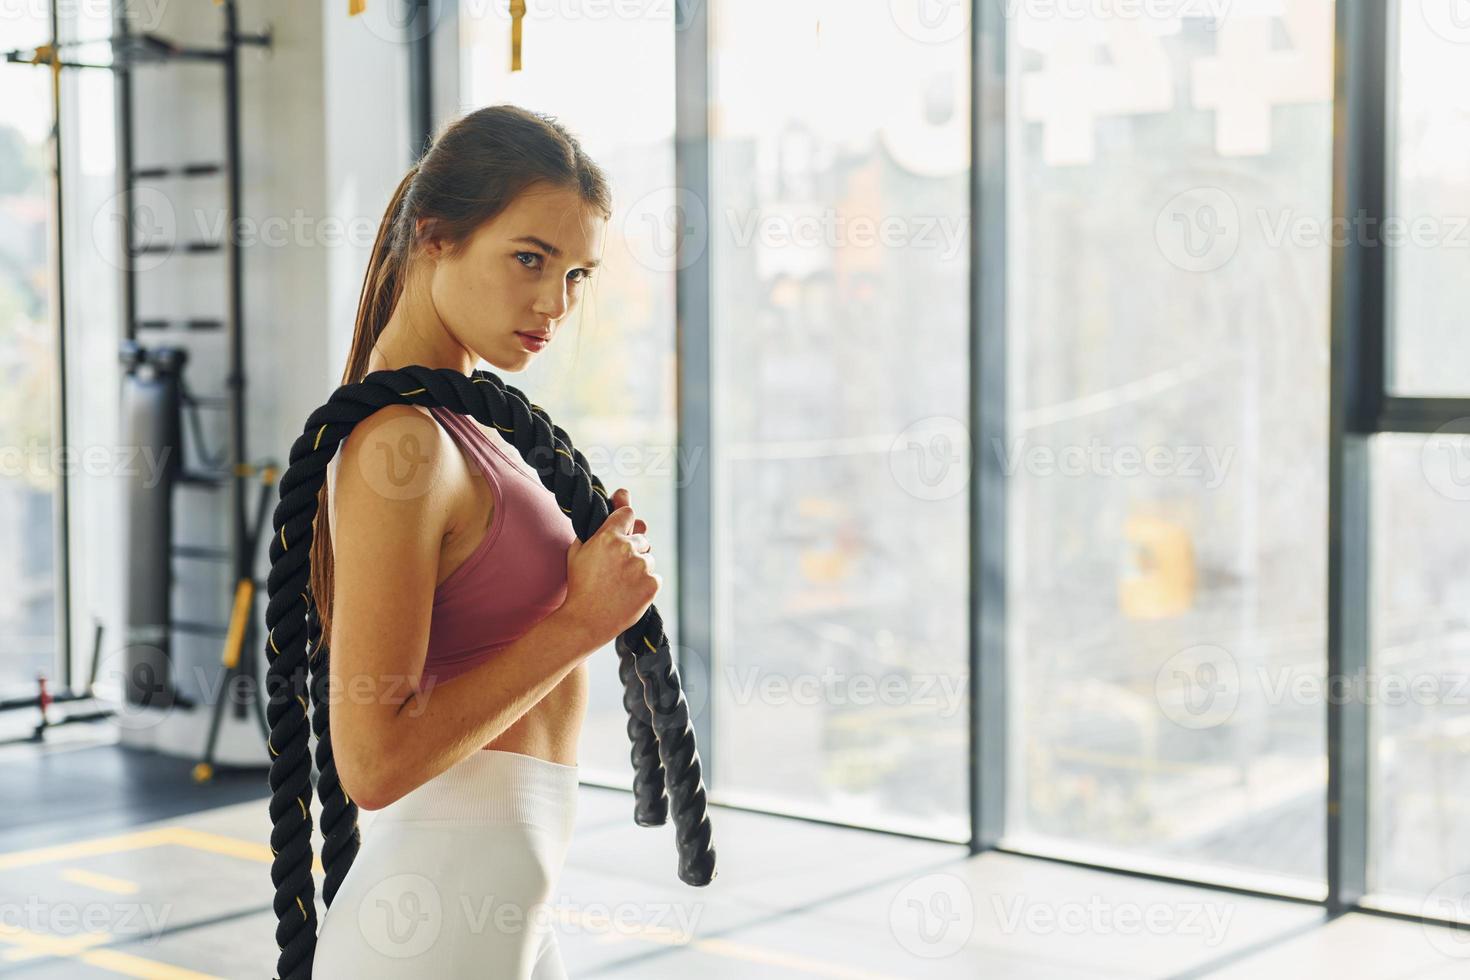 Conception of hobbies. Beautiful young woman with slim body type is in the gym photo